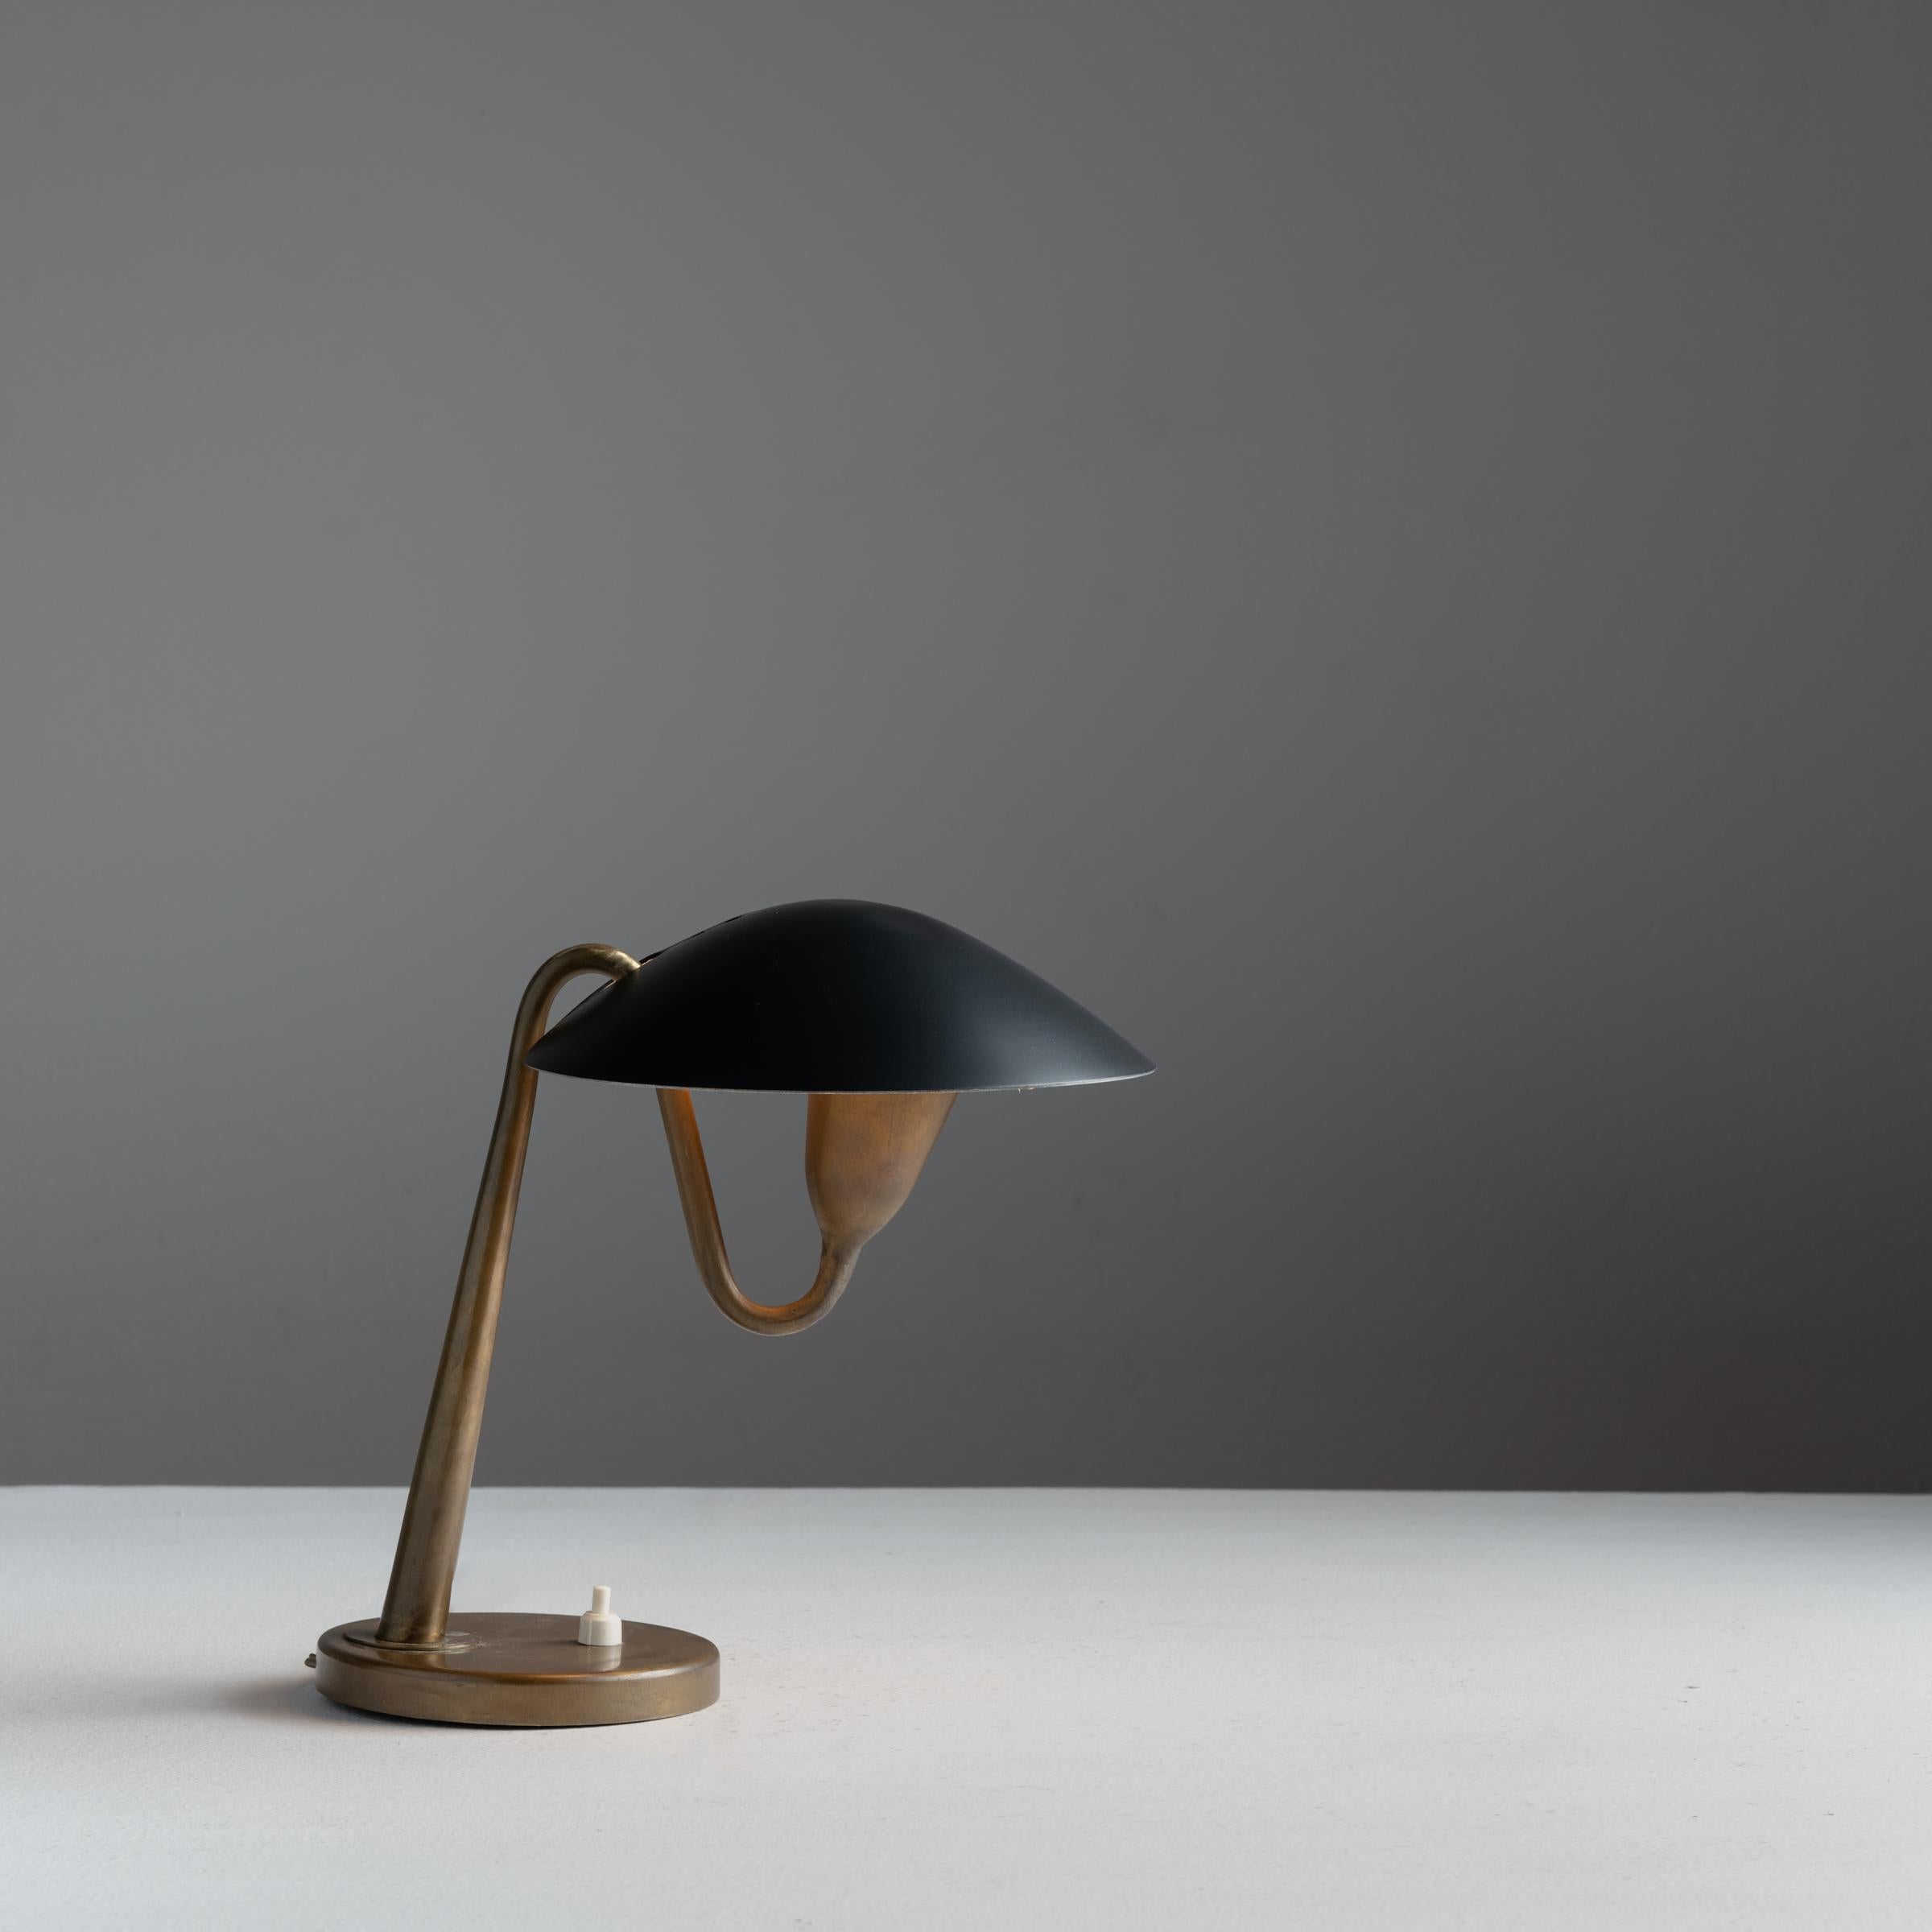 Model 200 table lamp by Giuseppe Ostuni for Oluce. Designed in Italy, circa 1950s. Wired for the US. We recommend one E12 base 75w maximum bulb.